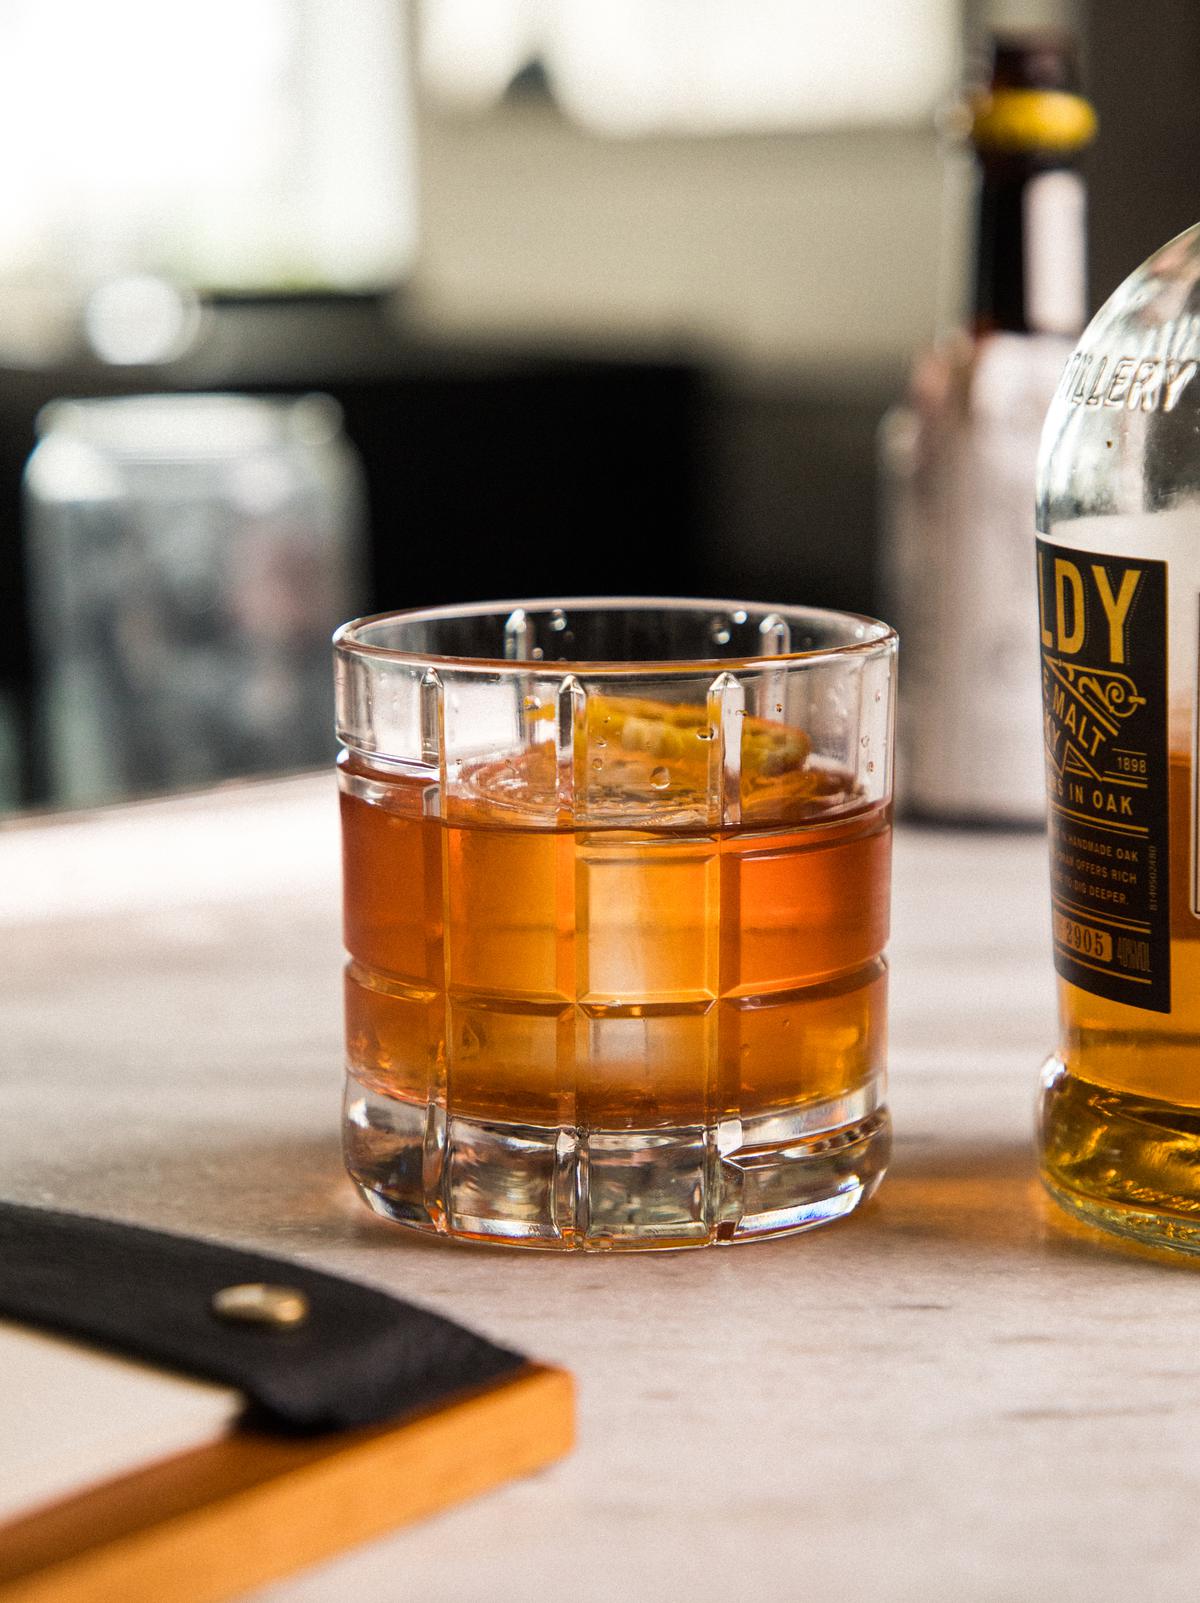 The AMPM old fashioned